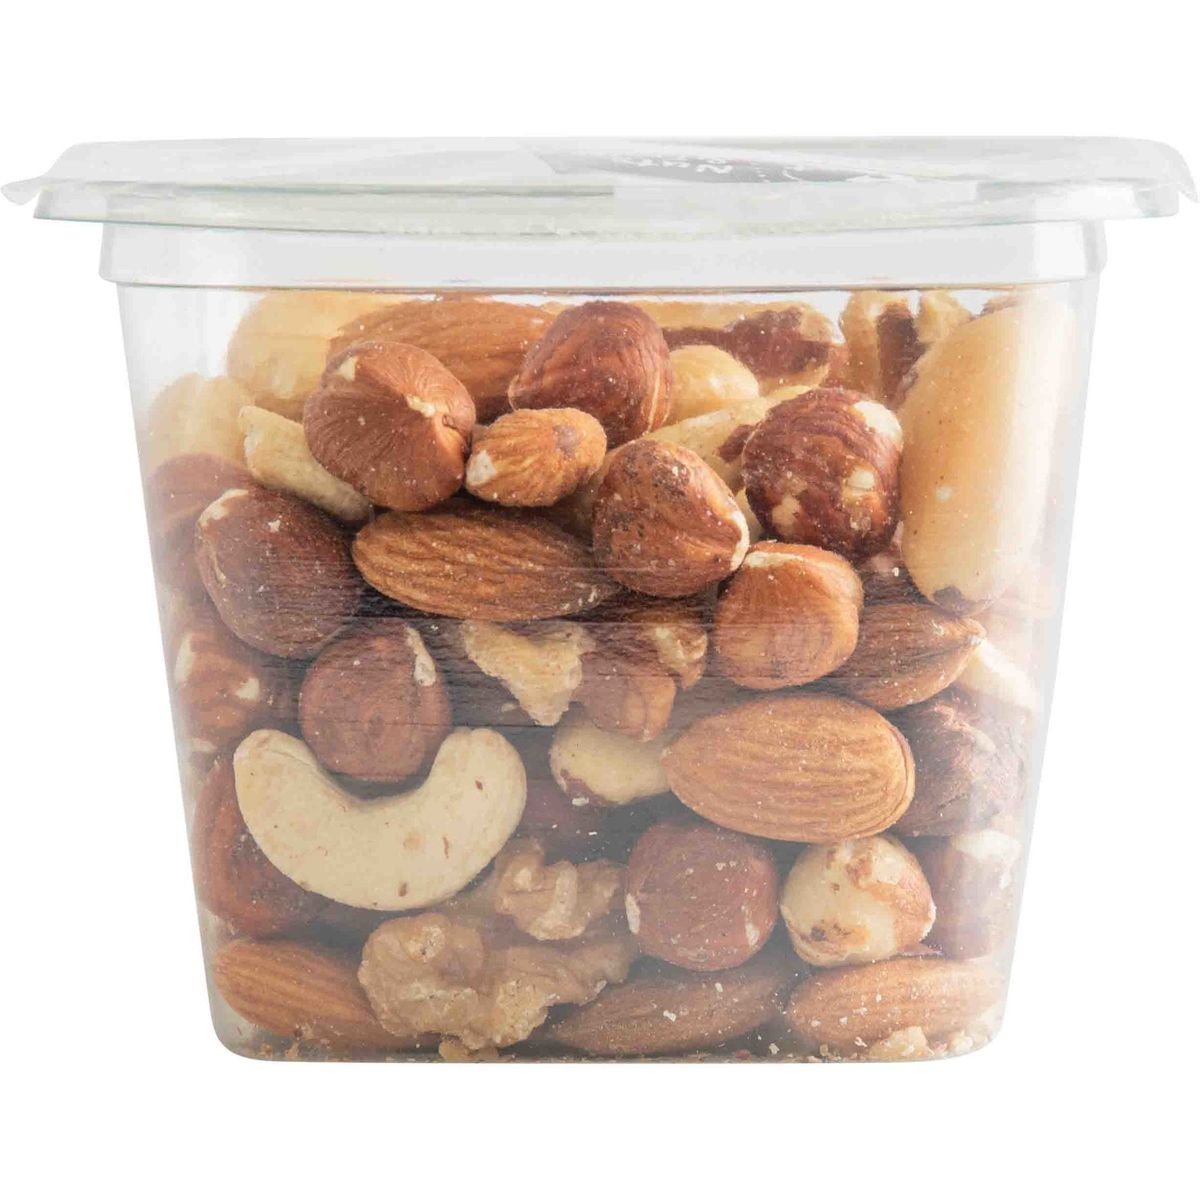 Carrefour Natuur Nuts & Fruits Notenmengeling 200 g